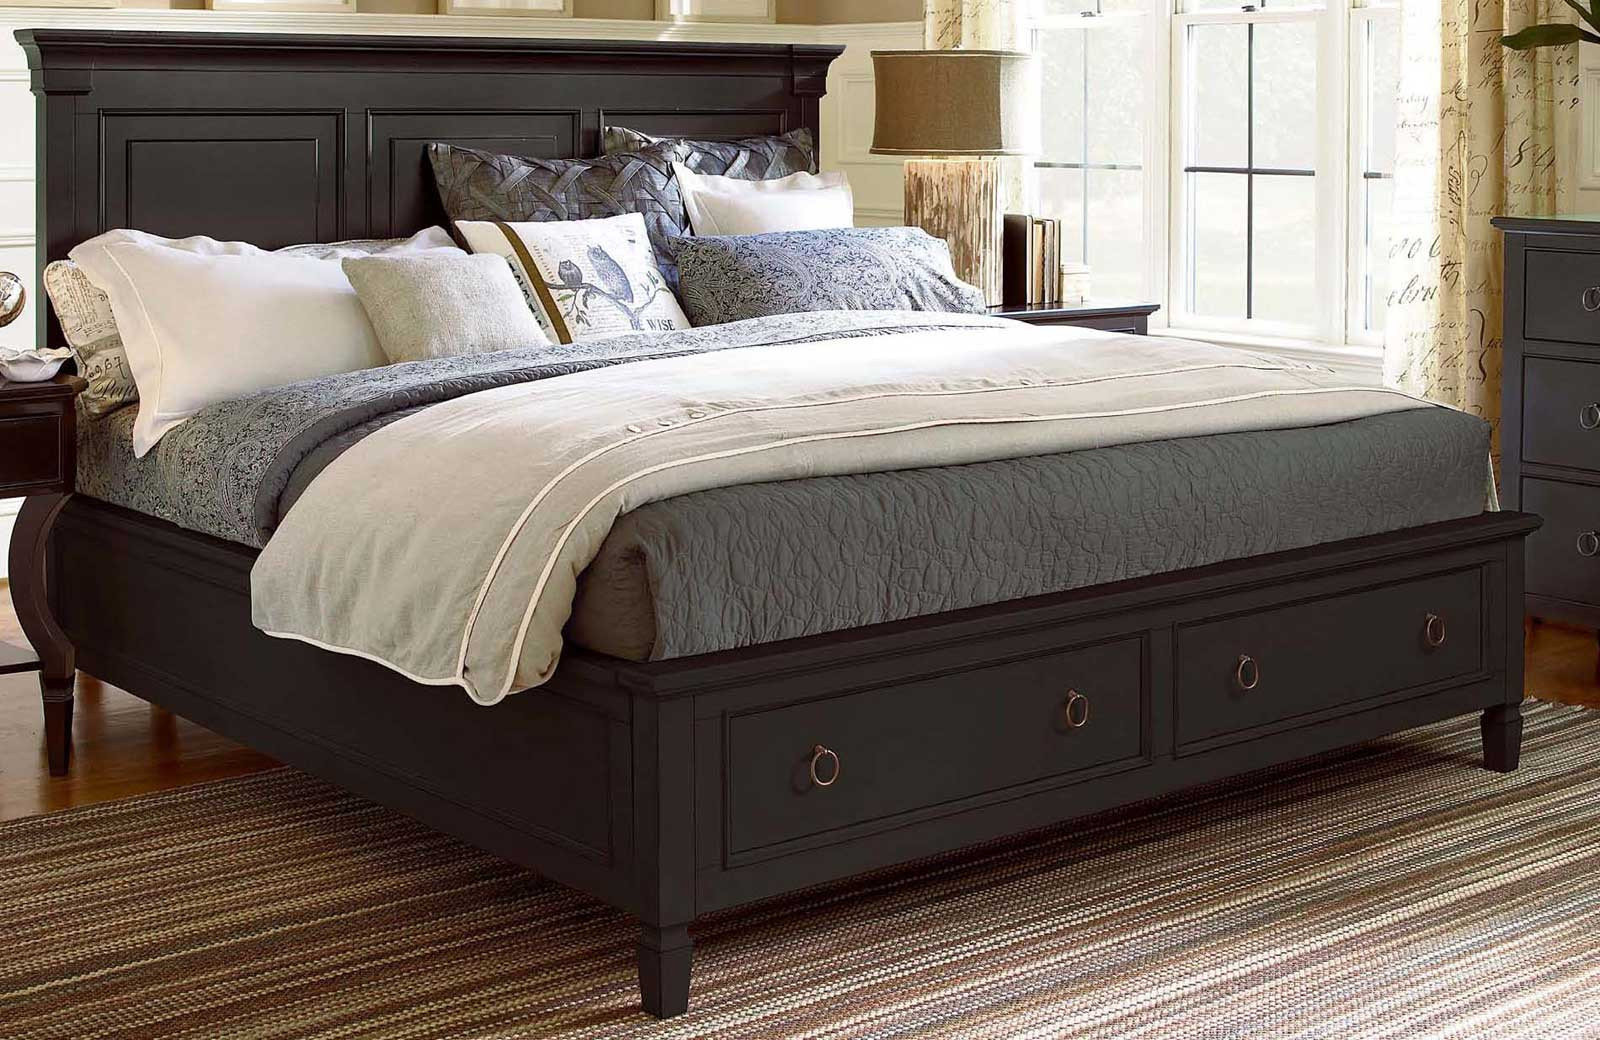 Small Bedroom King Bed
 Enhance the King Bedroom Sets The Soft Vineyard 6 Amaza